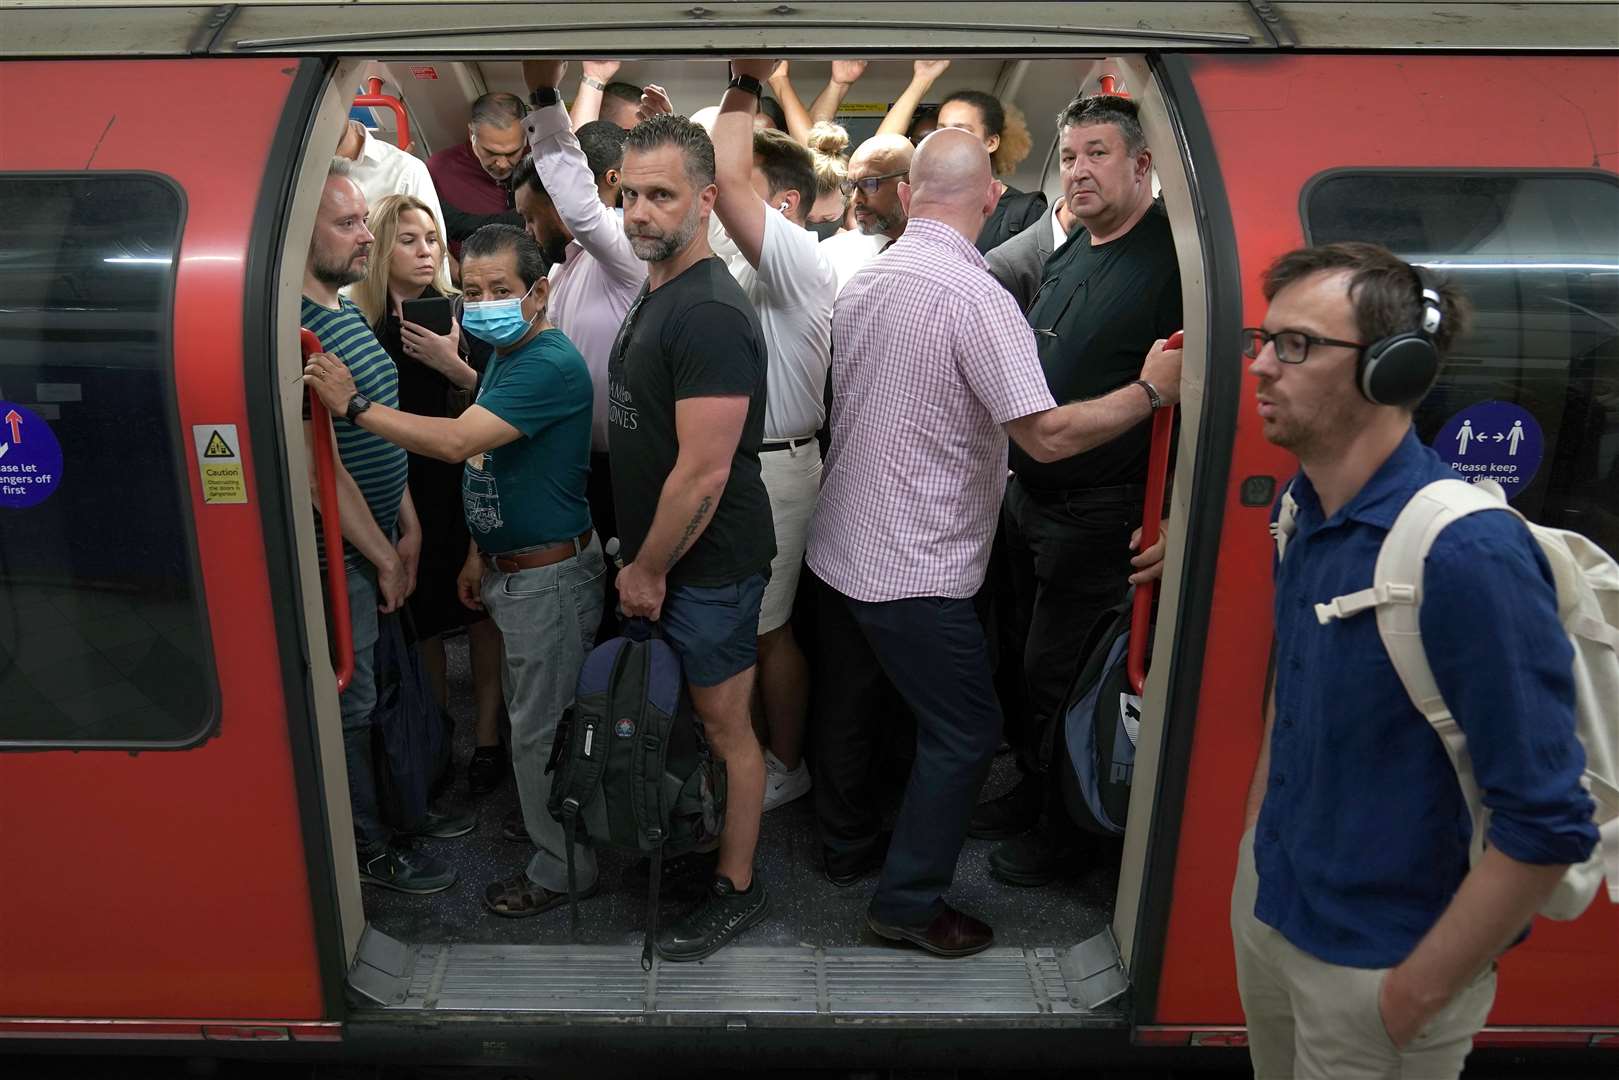 Passengers packed on a Central Line train suffered an uncomfortable journey (Aaron Chown/PA)